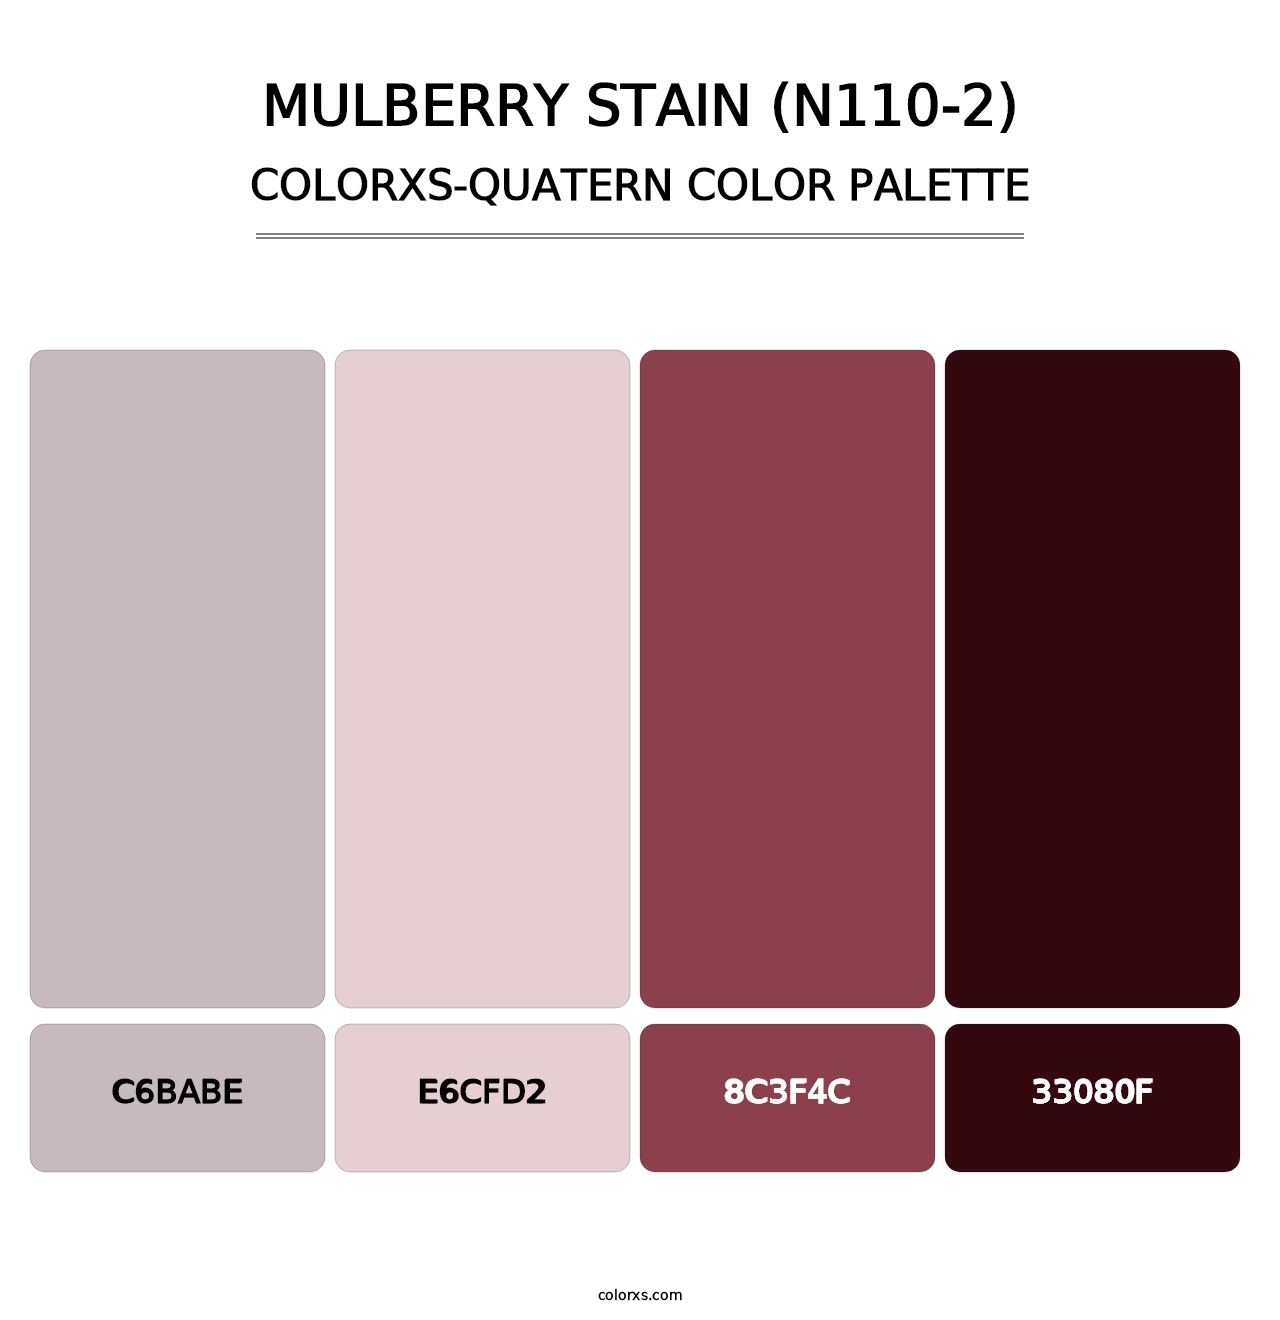 Mulberry Stain (N110-2) - Colorxs Quatern Palette